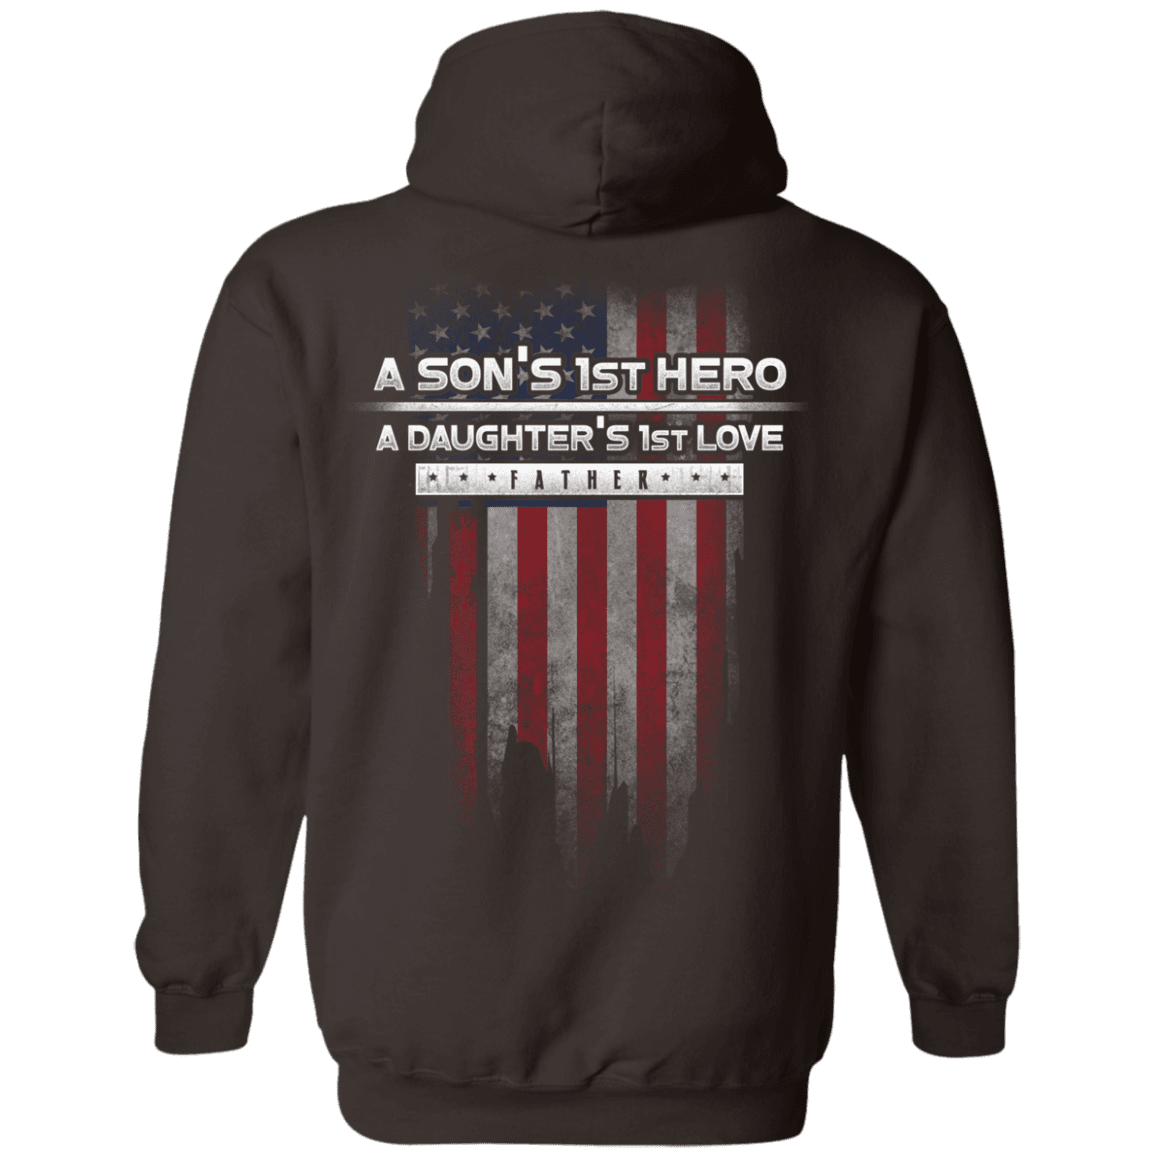 Military T-Shirt "Father's Day - A Son's 1st Hero A Daughter's 1st Love" - Men Back-TShirt-General-Veterans Nation